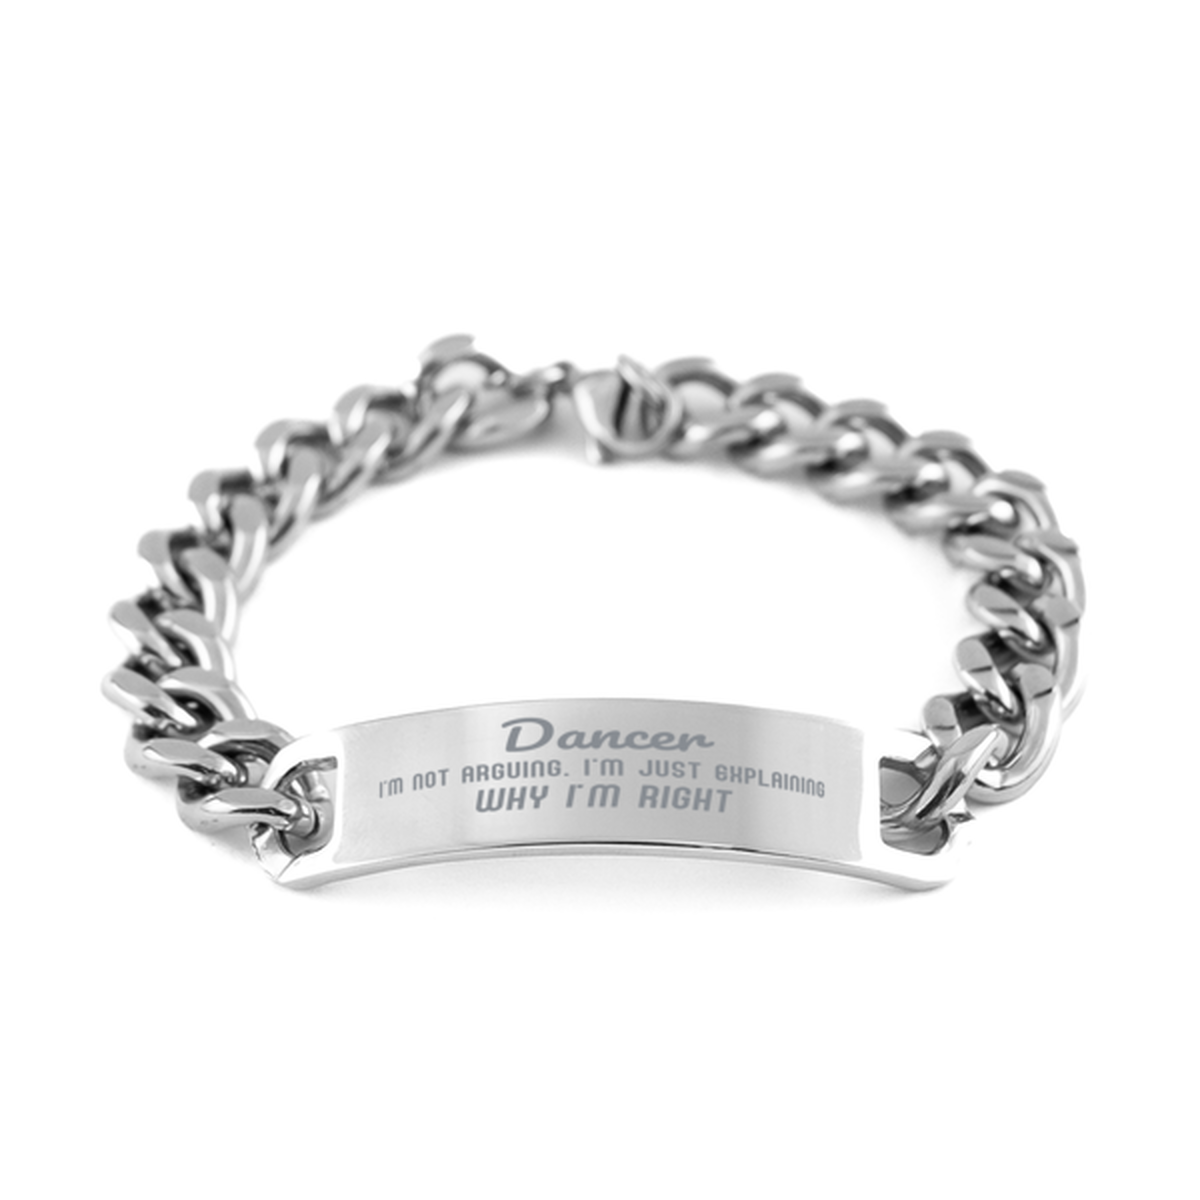 Dancer I'm not Arguing. I'm Just Explaining Why I'm RIGHT Cuban Chain Stainless Steel Bracelet, Graduation Birthday Christmas Dancer Gifts For Dancer Funny Saying Quote Present for Men Women Coworker